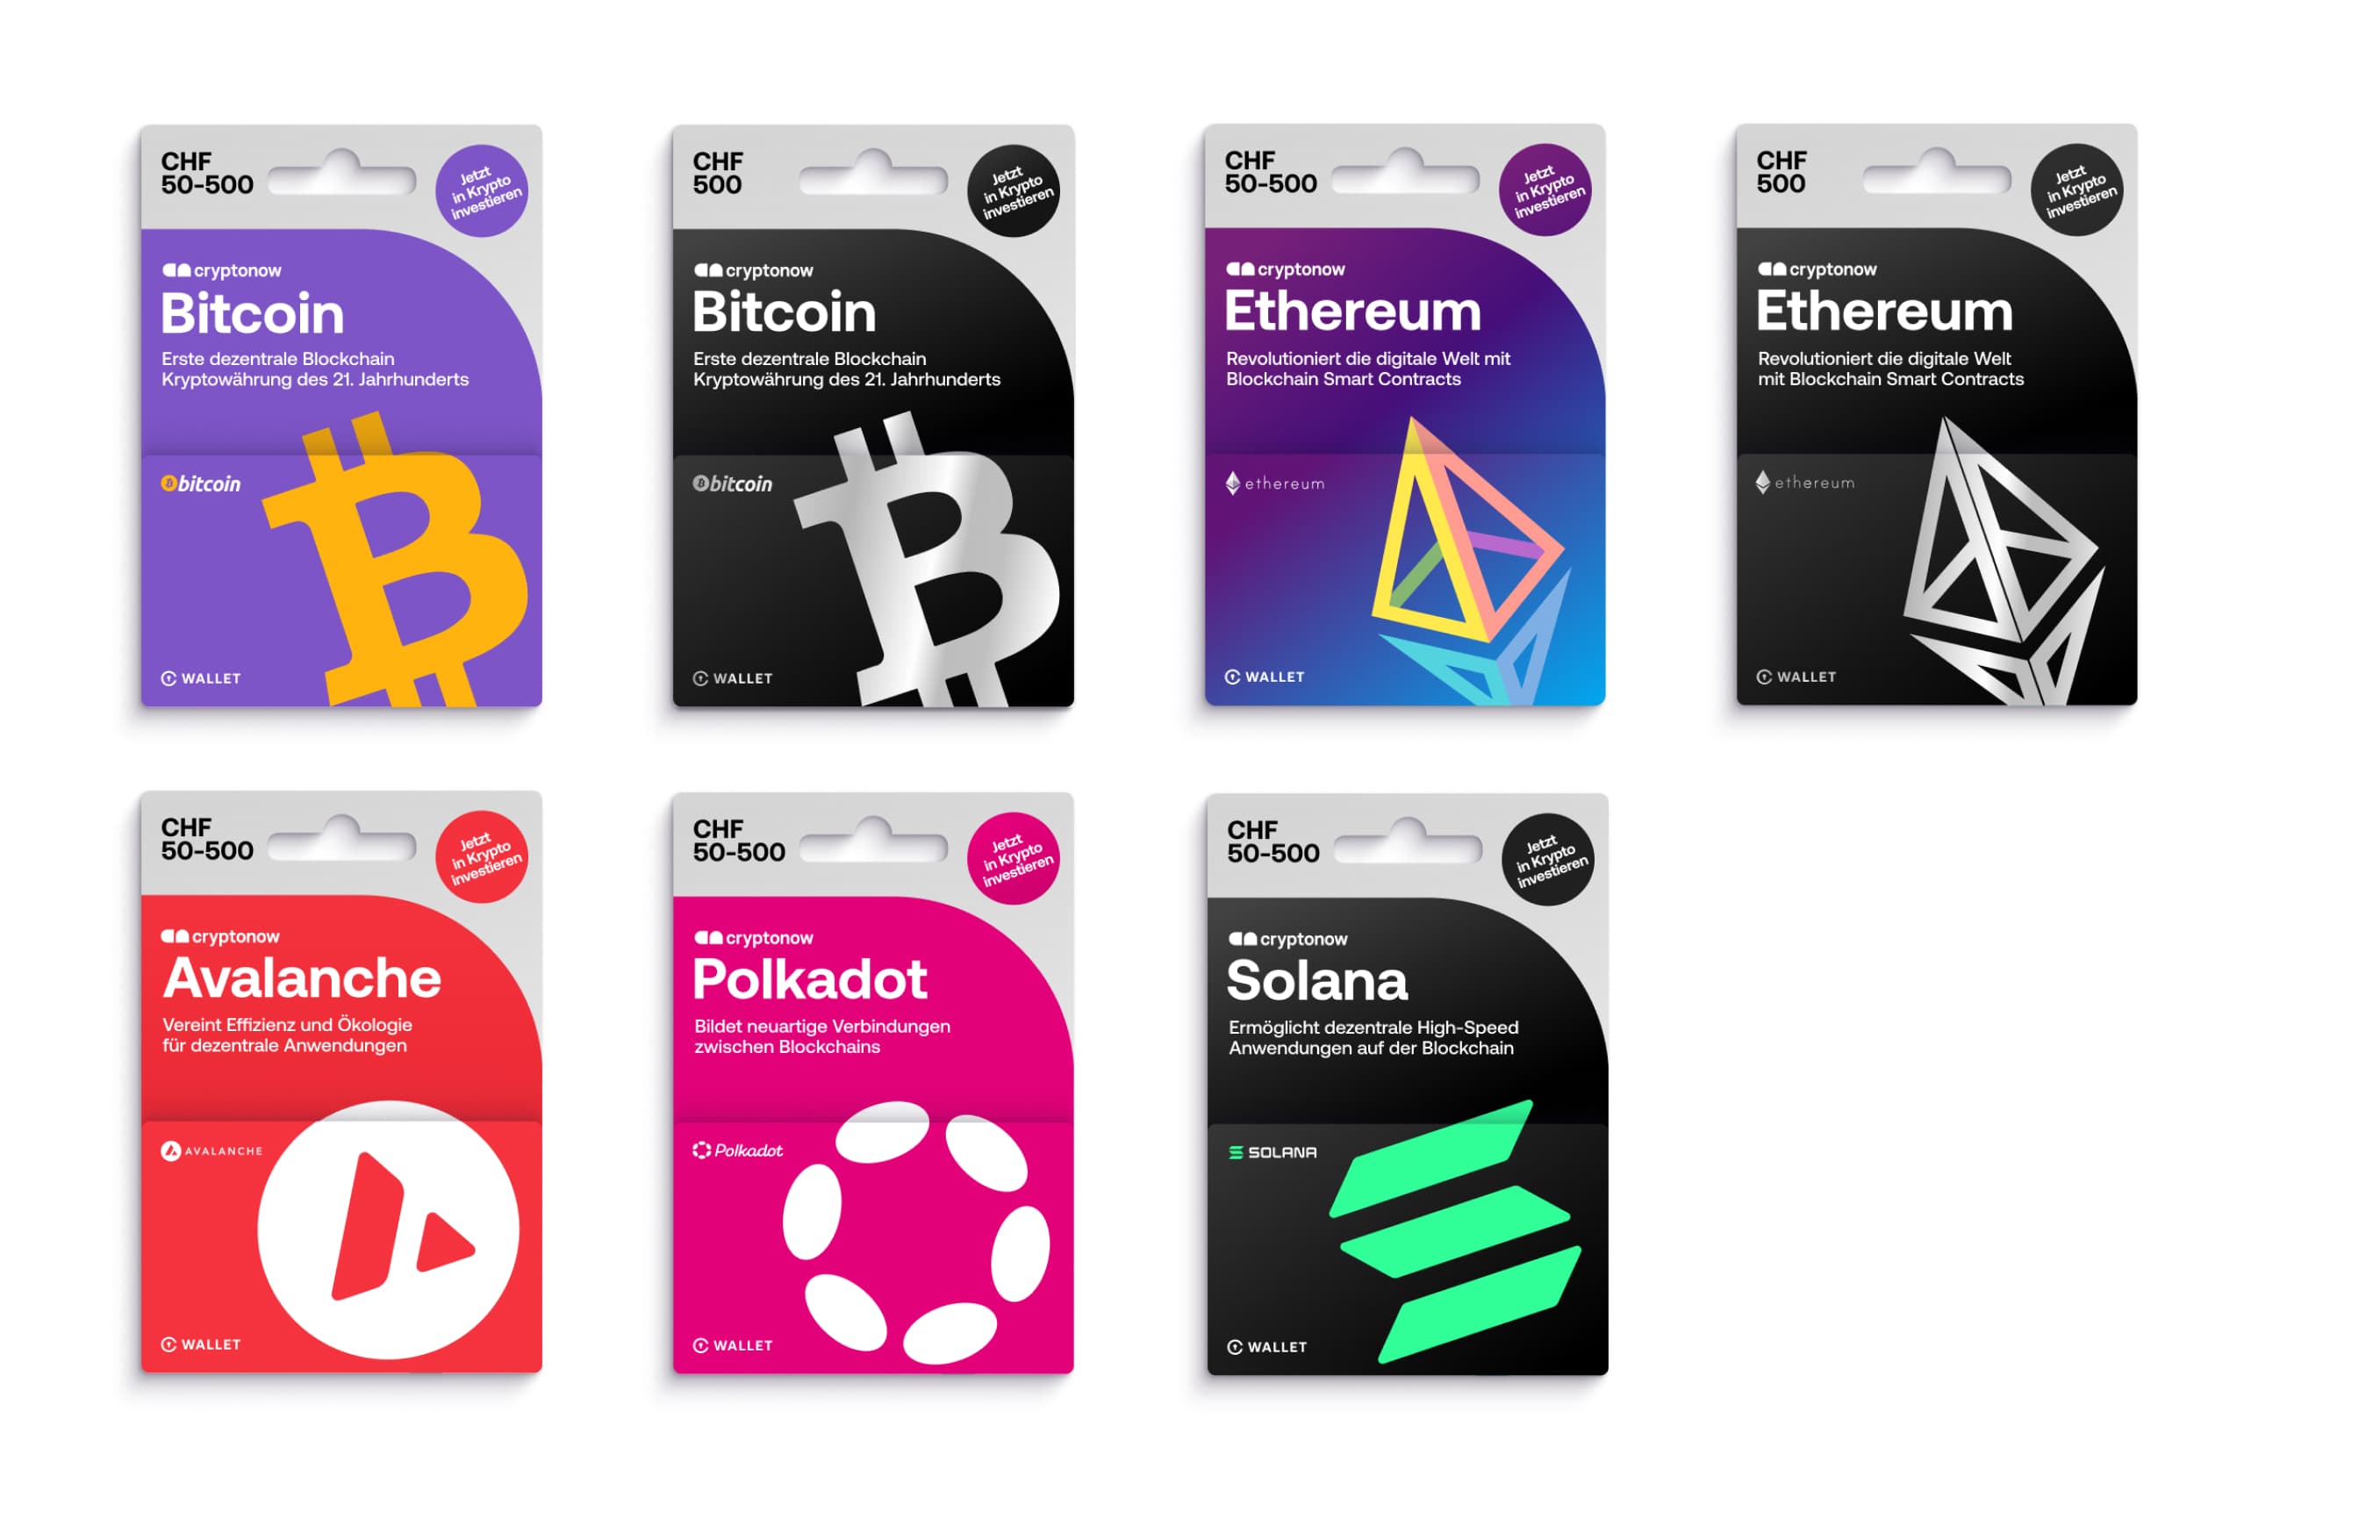 Available currencies on the Cryptonow gift card: Bitcoin, Ethereum, Avalanche, Polkadot, Solana